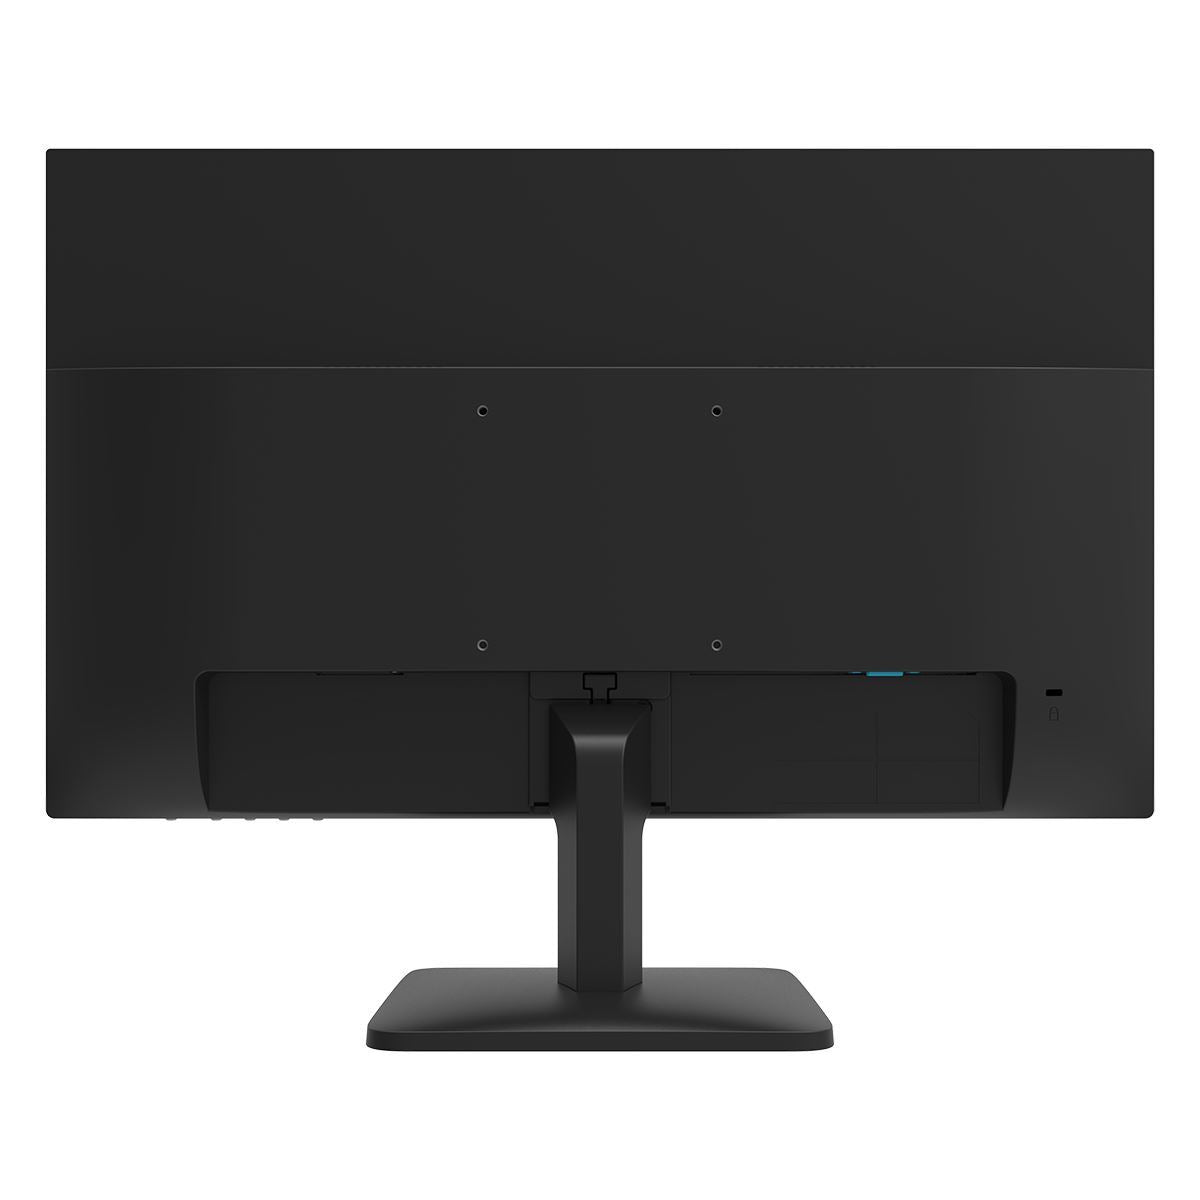 HiLook M-2210F0 21.5 inch FHD Display Monitor